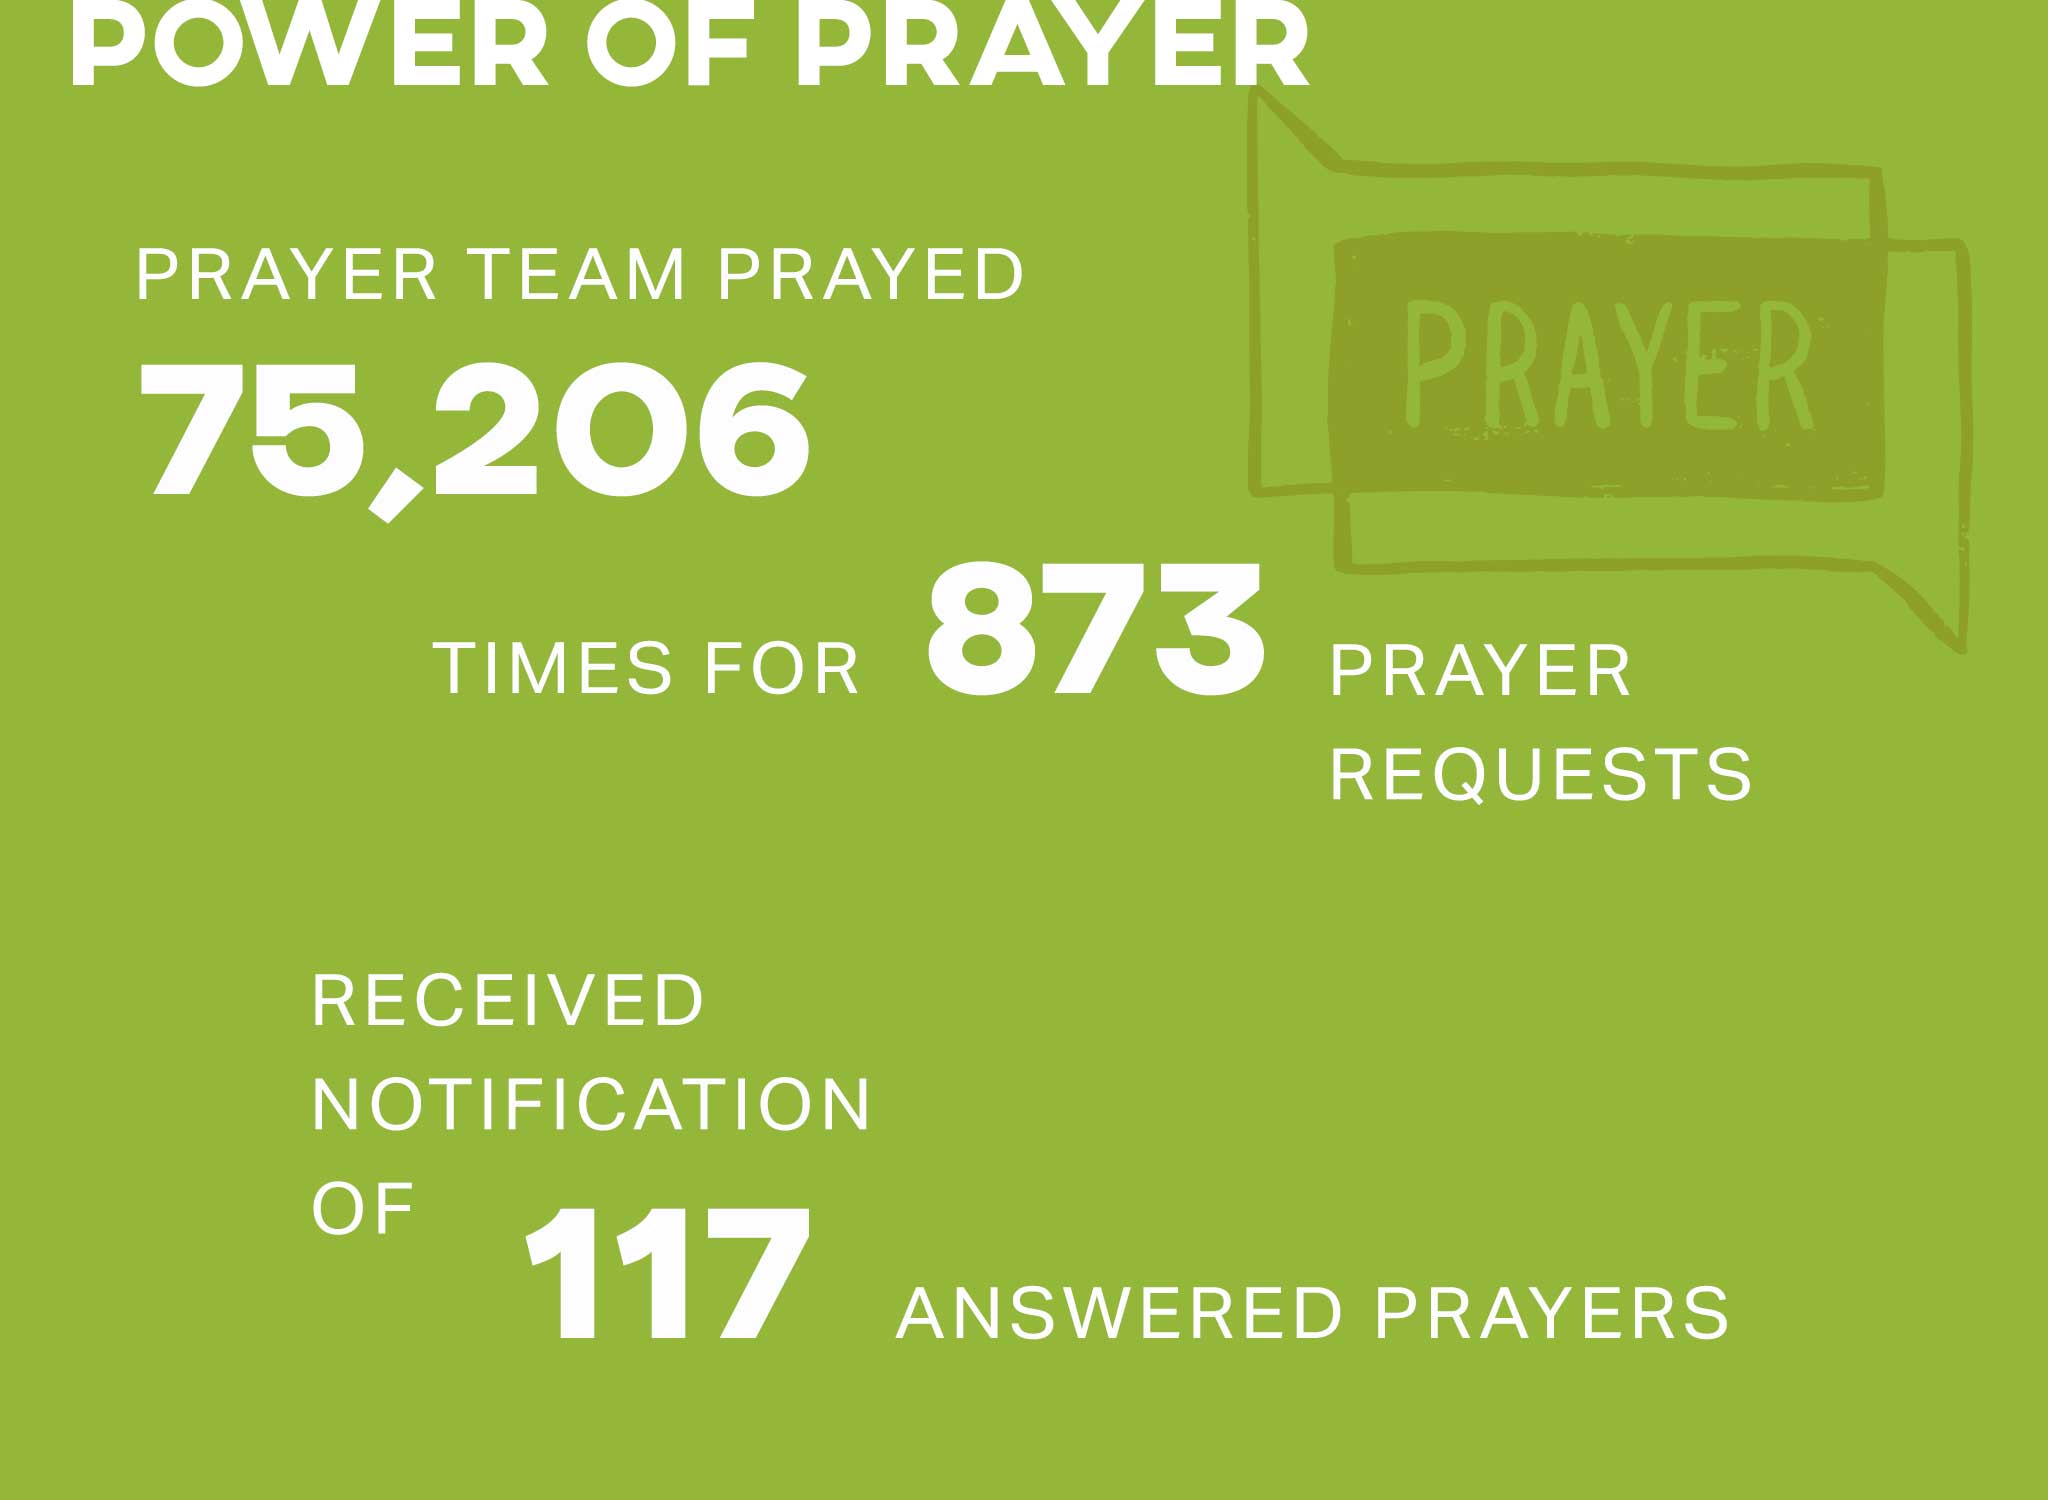 Our prayer team prayed 75,206 times for 873 prayer requests, with confirmation of 117 answered prayers.